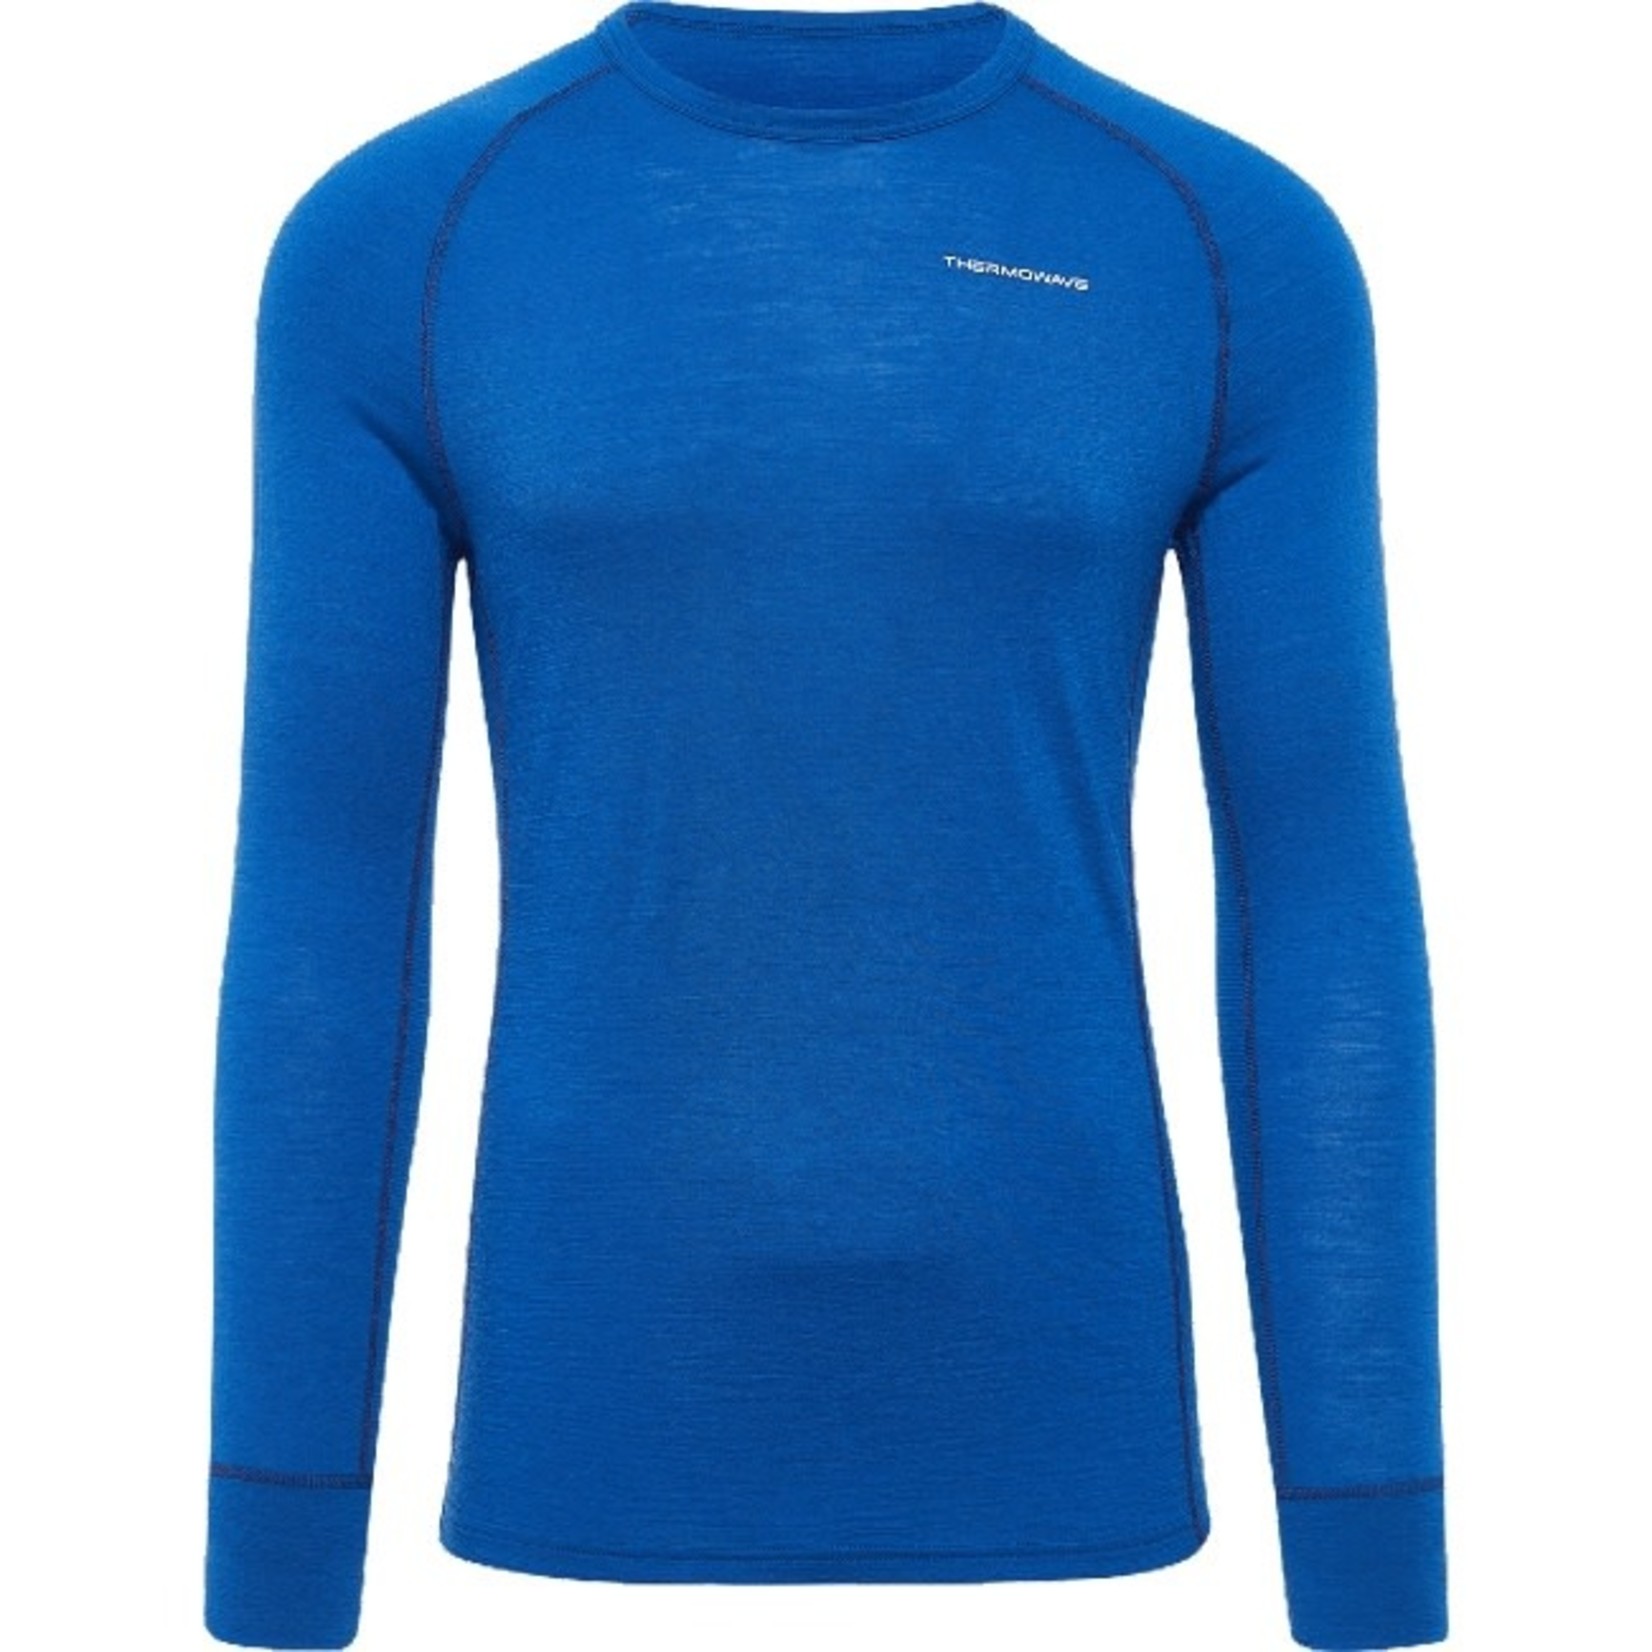 Thermowave Men's Merino One50 Long Sleeve Base Layer Tee